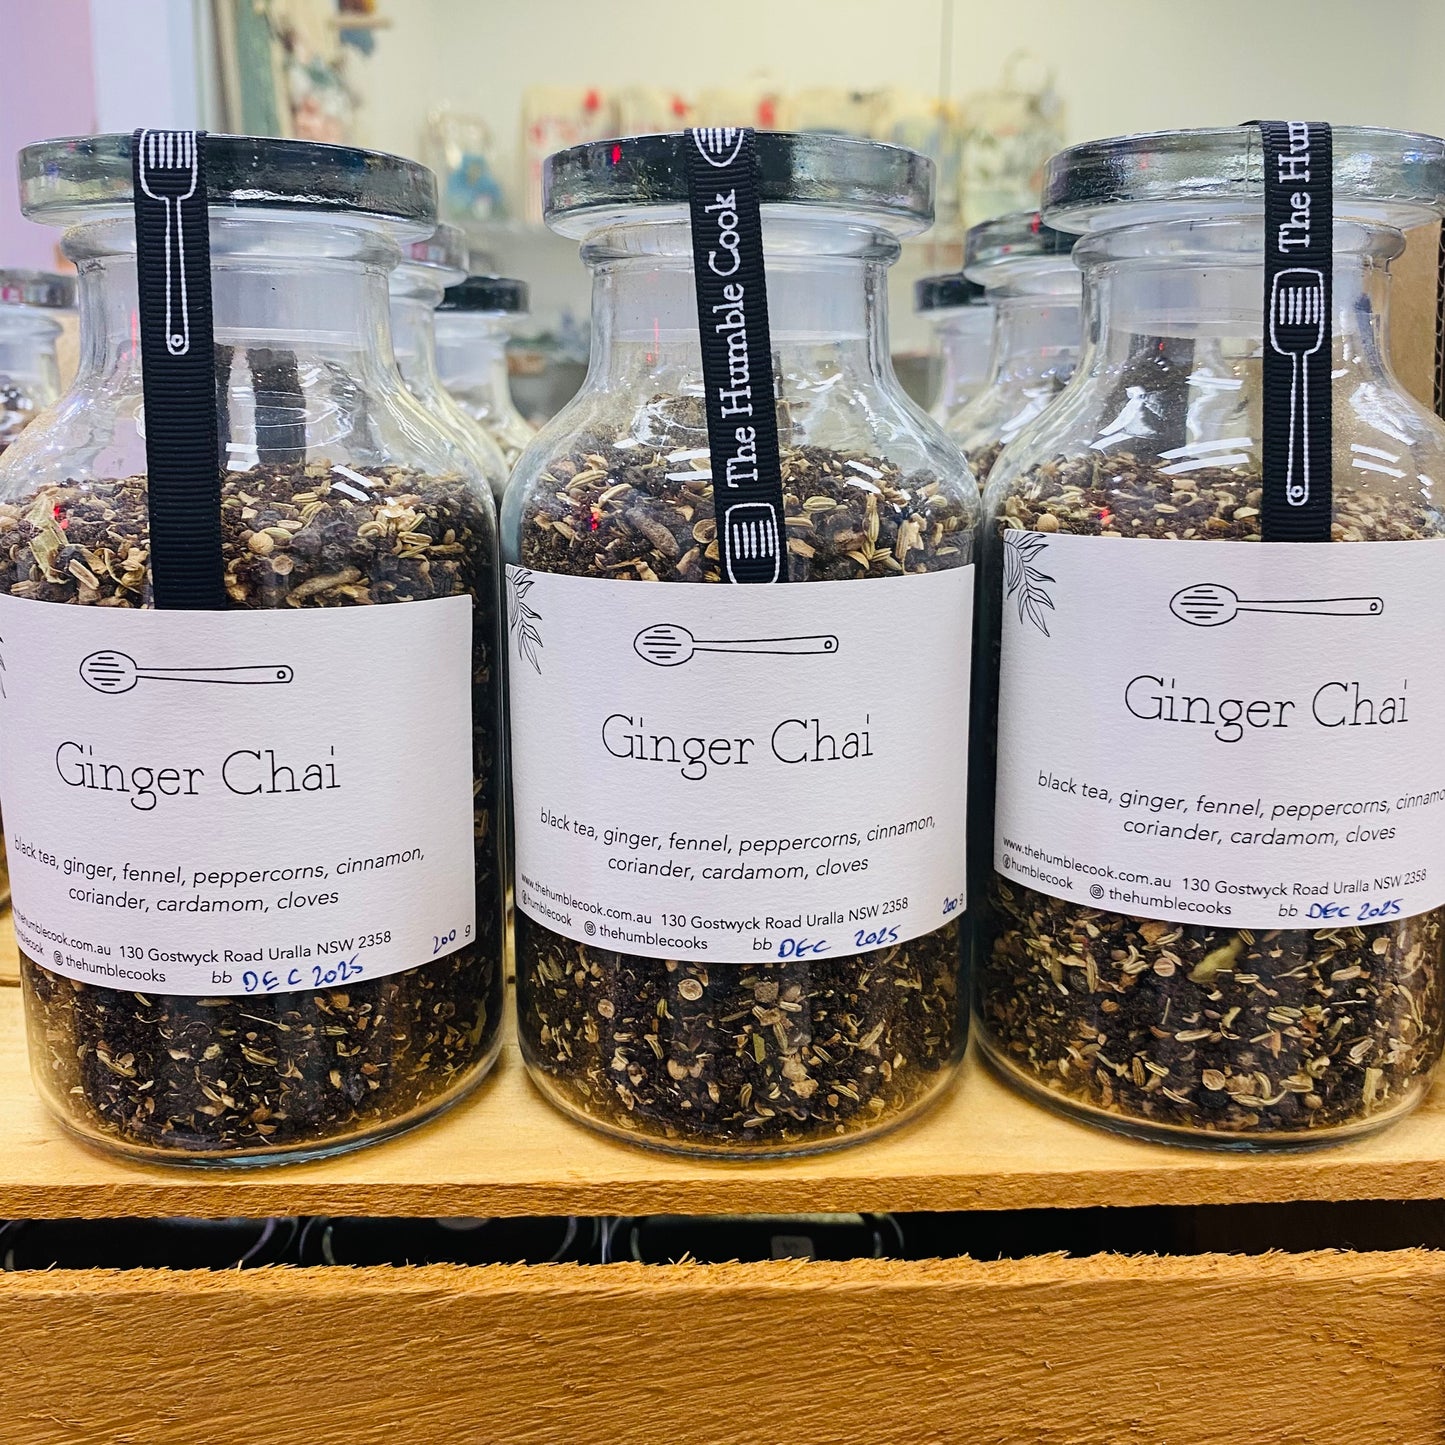 Ginger Chai Apothecary 200g by The Humble Cook